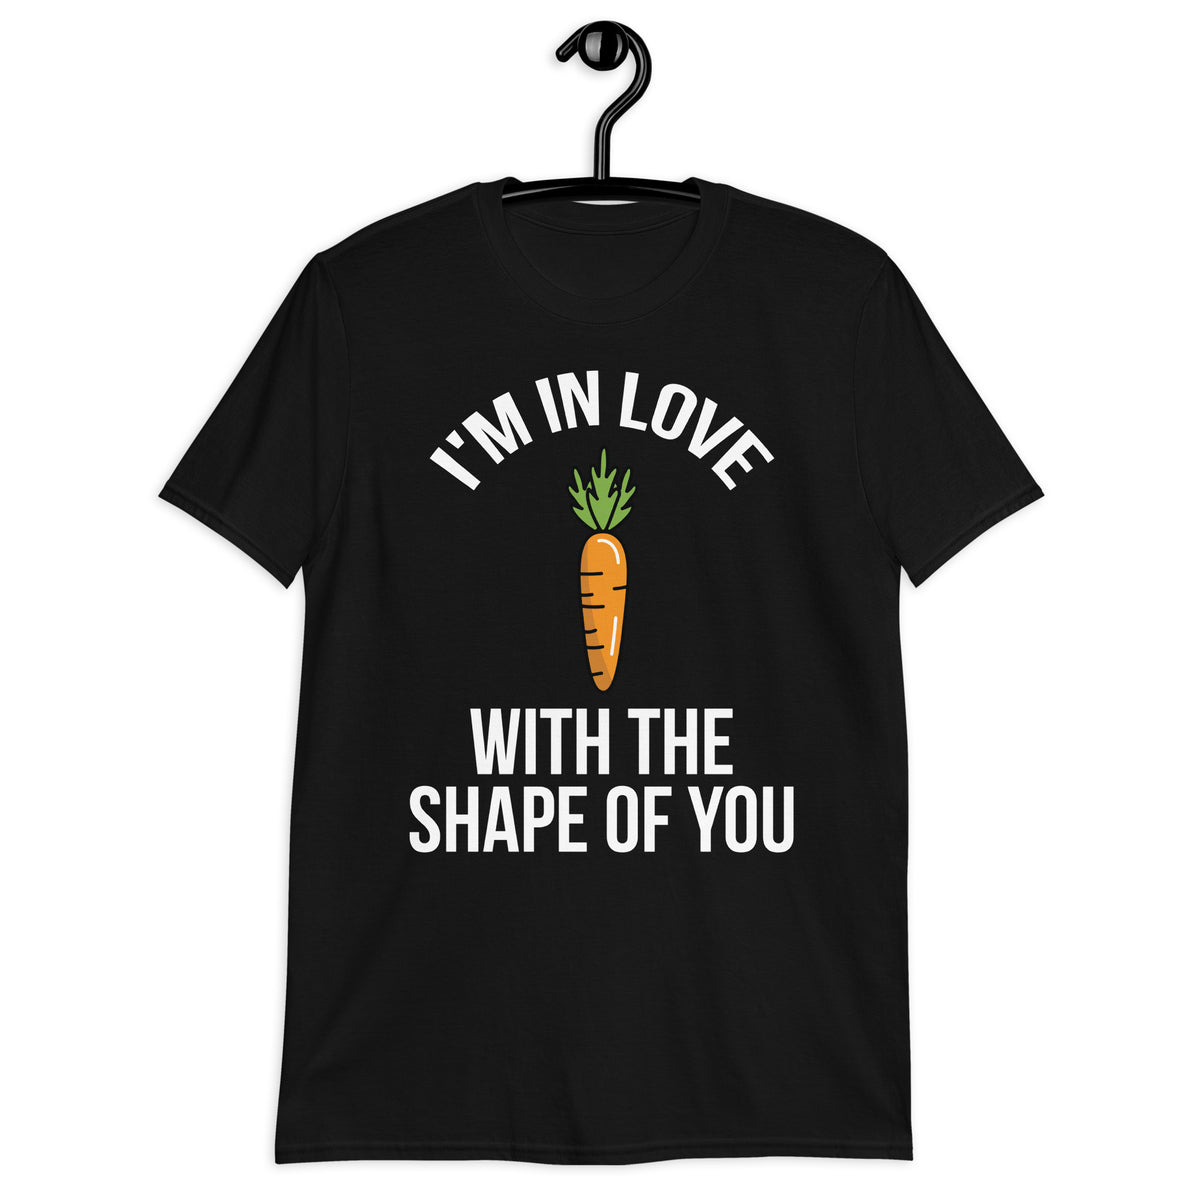 I'M IN LOVE WITH SHAPE OF YOU...CARROT Short-Sleeve  T-Shirt